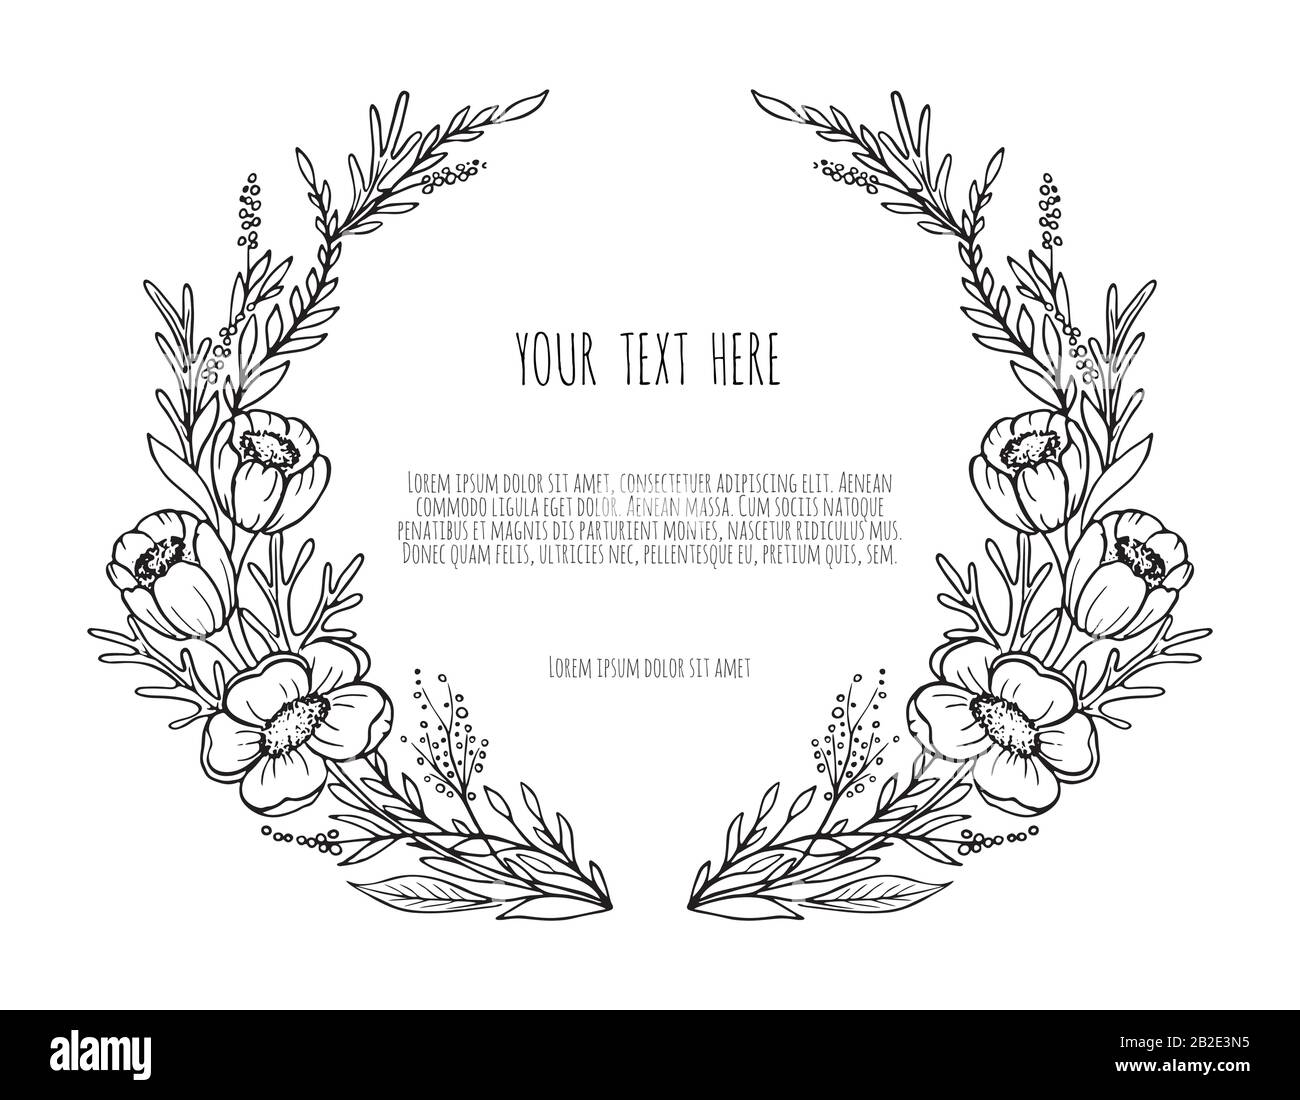 Hand drawn decor with flowers Anemone leaves and branches. Vector nature illustration in vintage style. Stock Vector